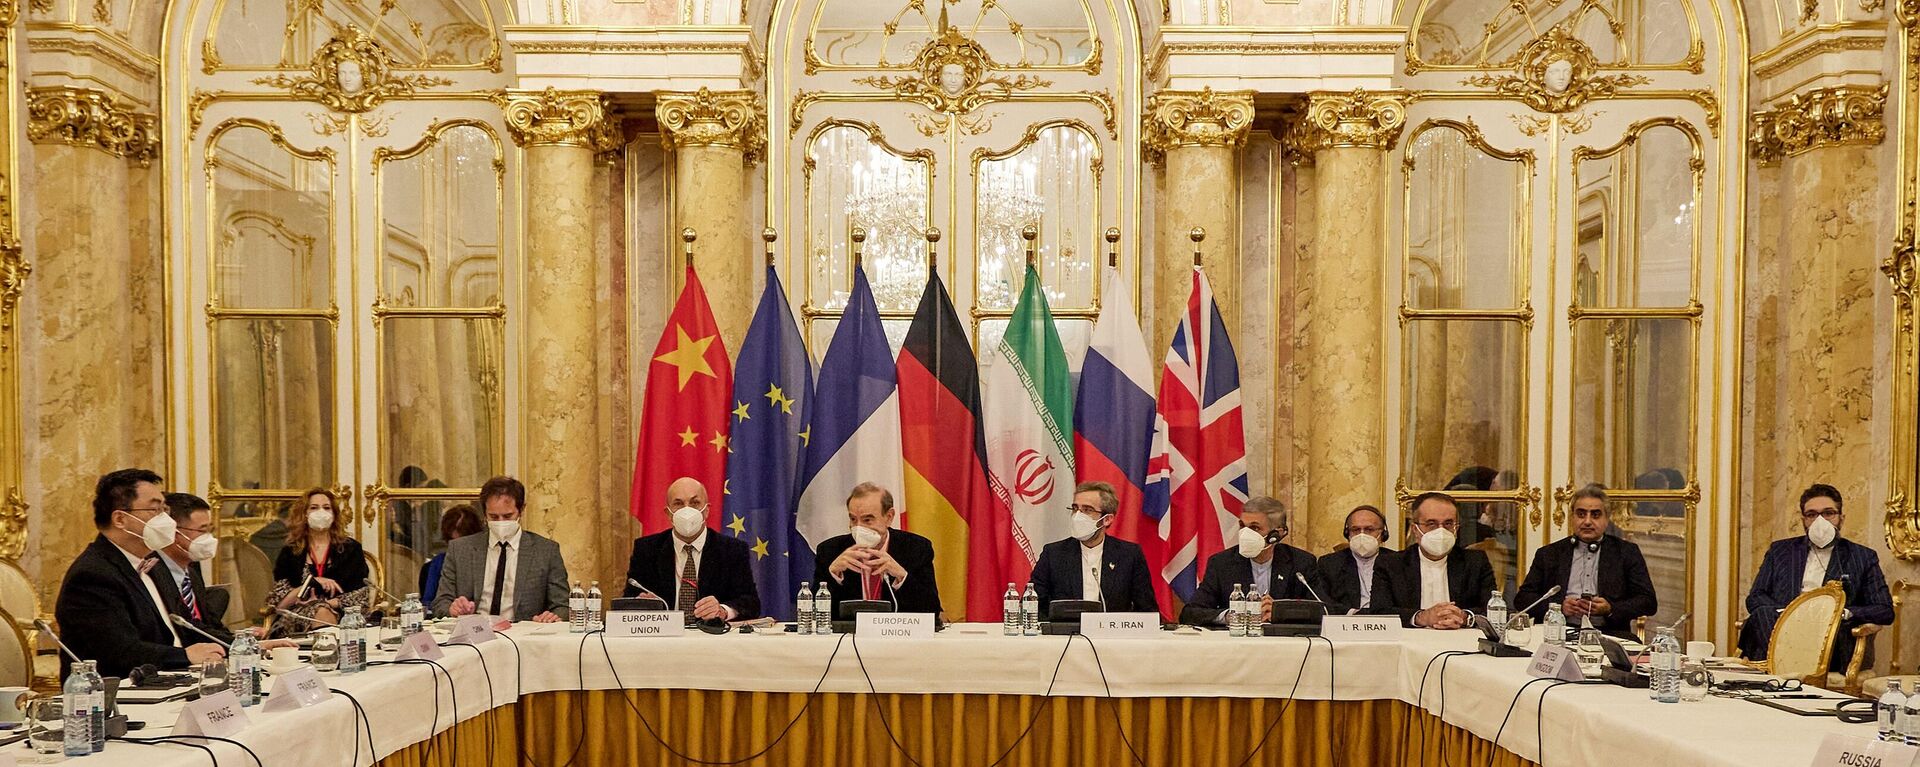 This handout photo taken and released on December 9, 2021 by the EU delegation in Vienna - EEAS shows representatives attending a meeting of the joint commission on negotiations aimed at reviving the Iran nuclear deal in Vienna, Austria. - Negotiators of the Iranian nuclear deal met on December 9, 2021, 'determined to work hard' to save the 2015 deal after the suspension of talks last week. (Photo by Handout / EU DELEGATION IN VIENNA / AFP)  - Sputnik International, 1920, 06.10.2022